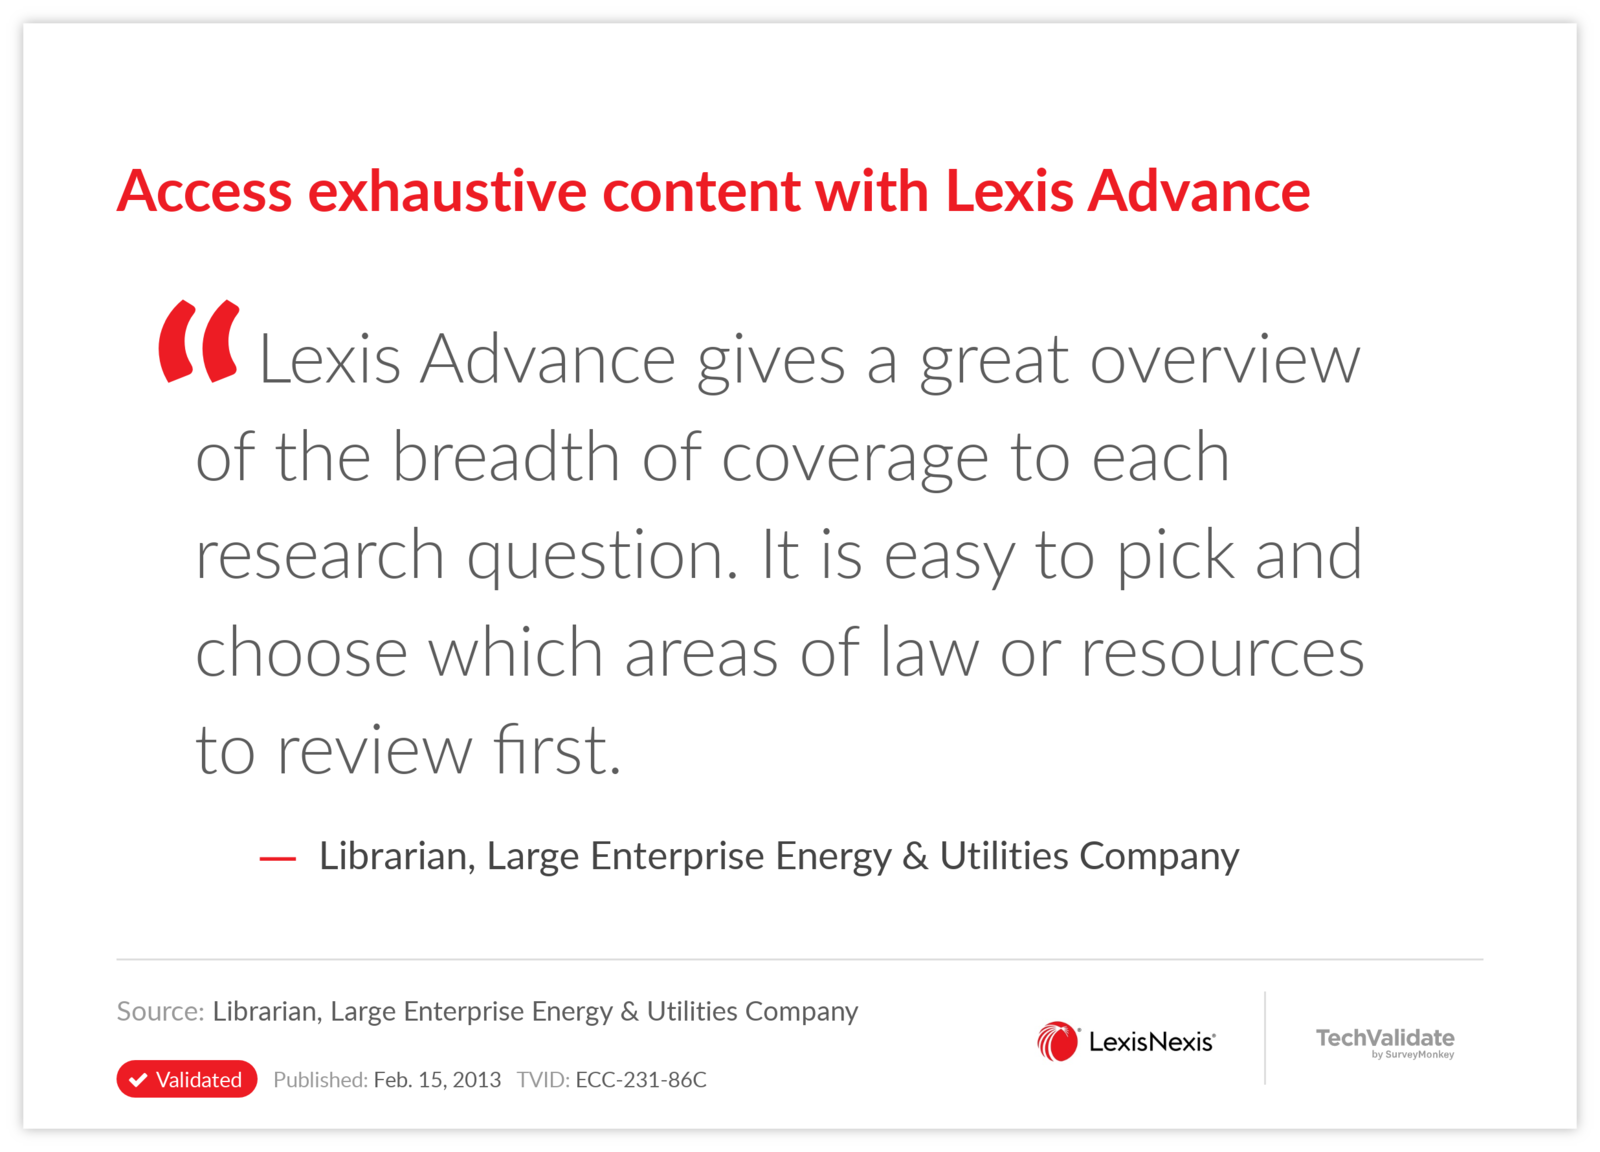 Access exhaustive content with Lexis Advance